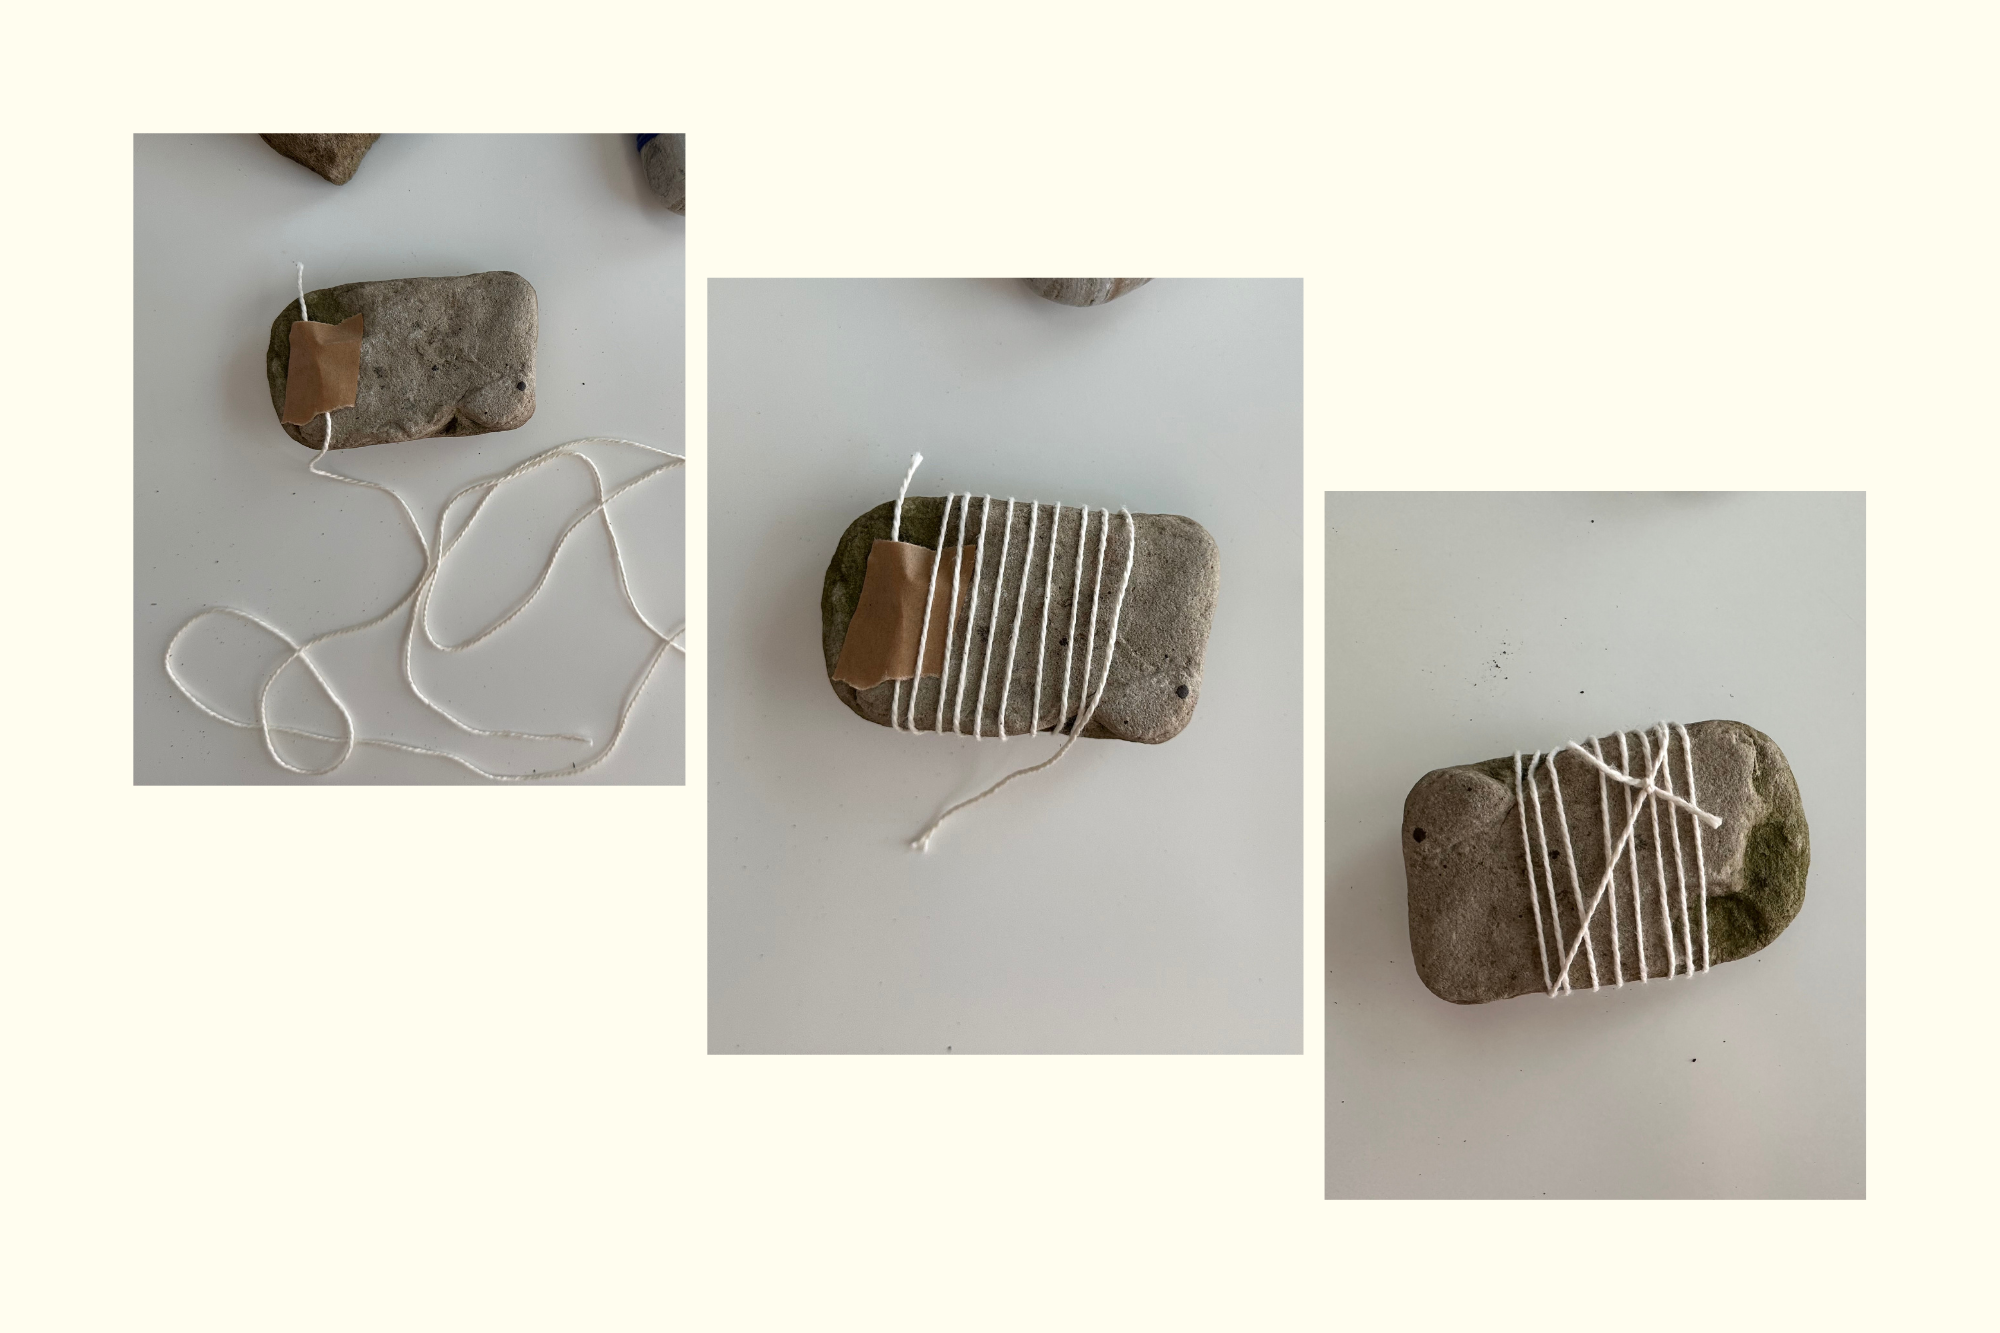 wrapping a rock for weaving